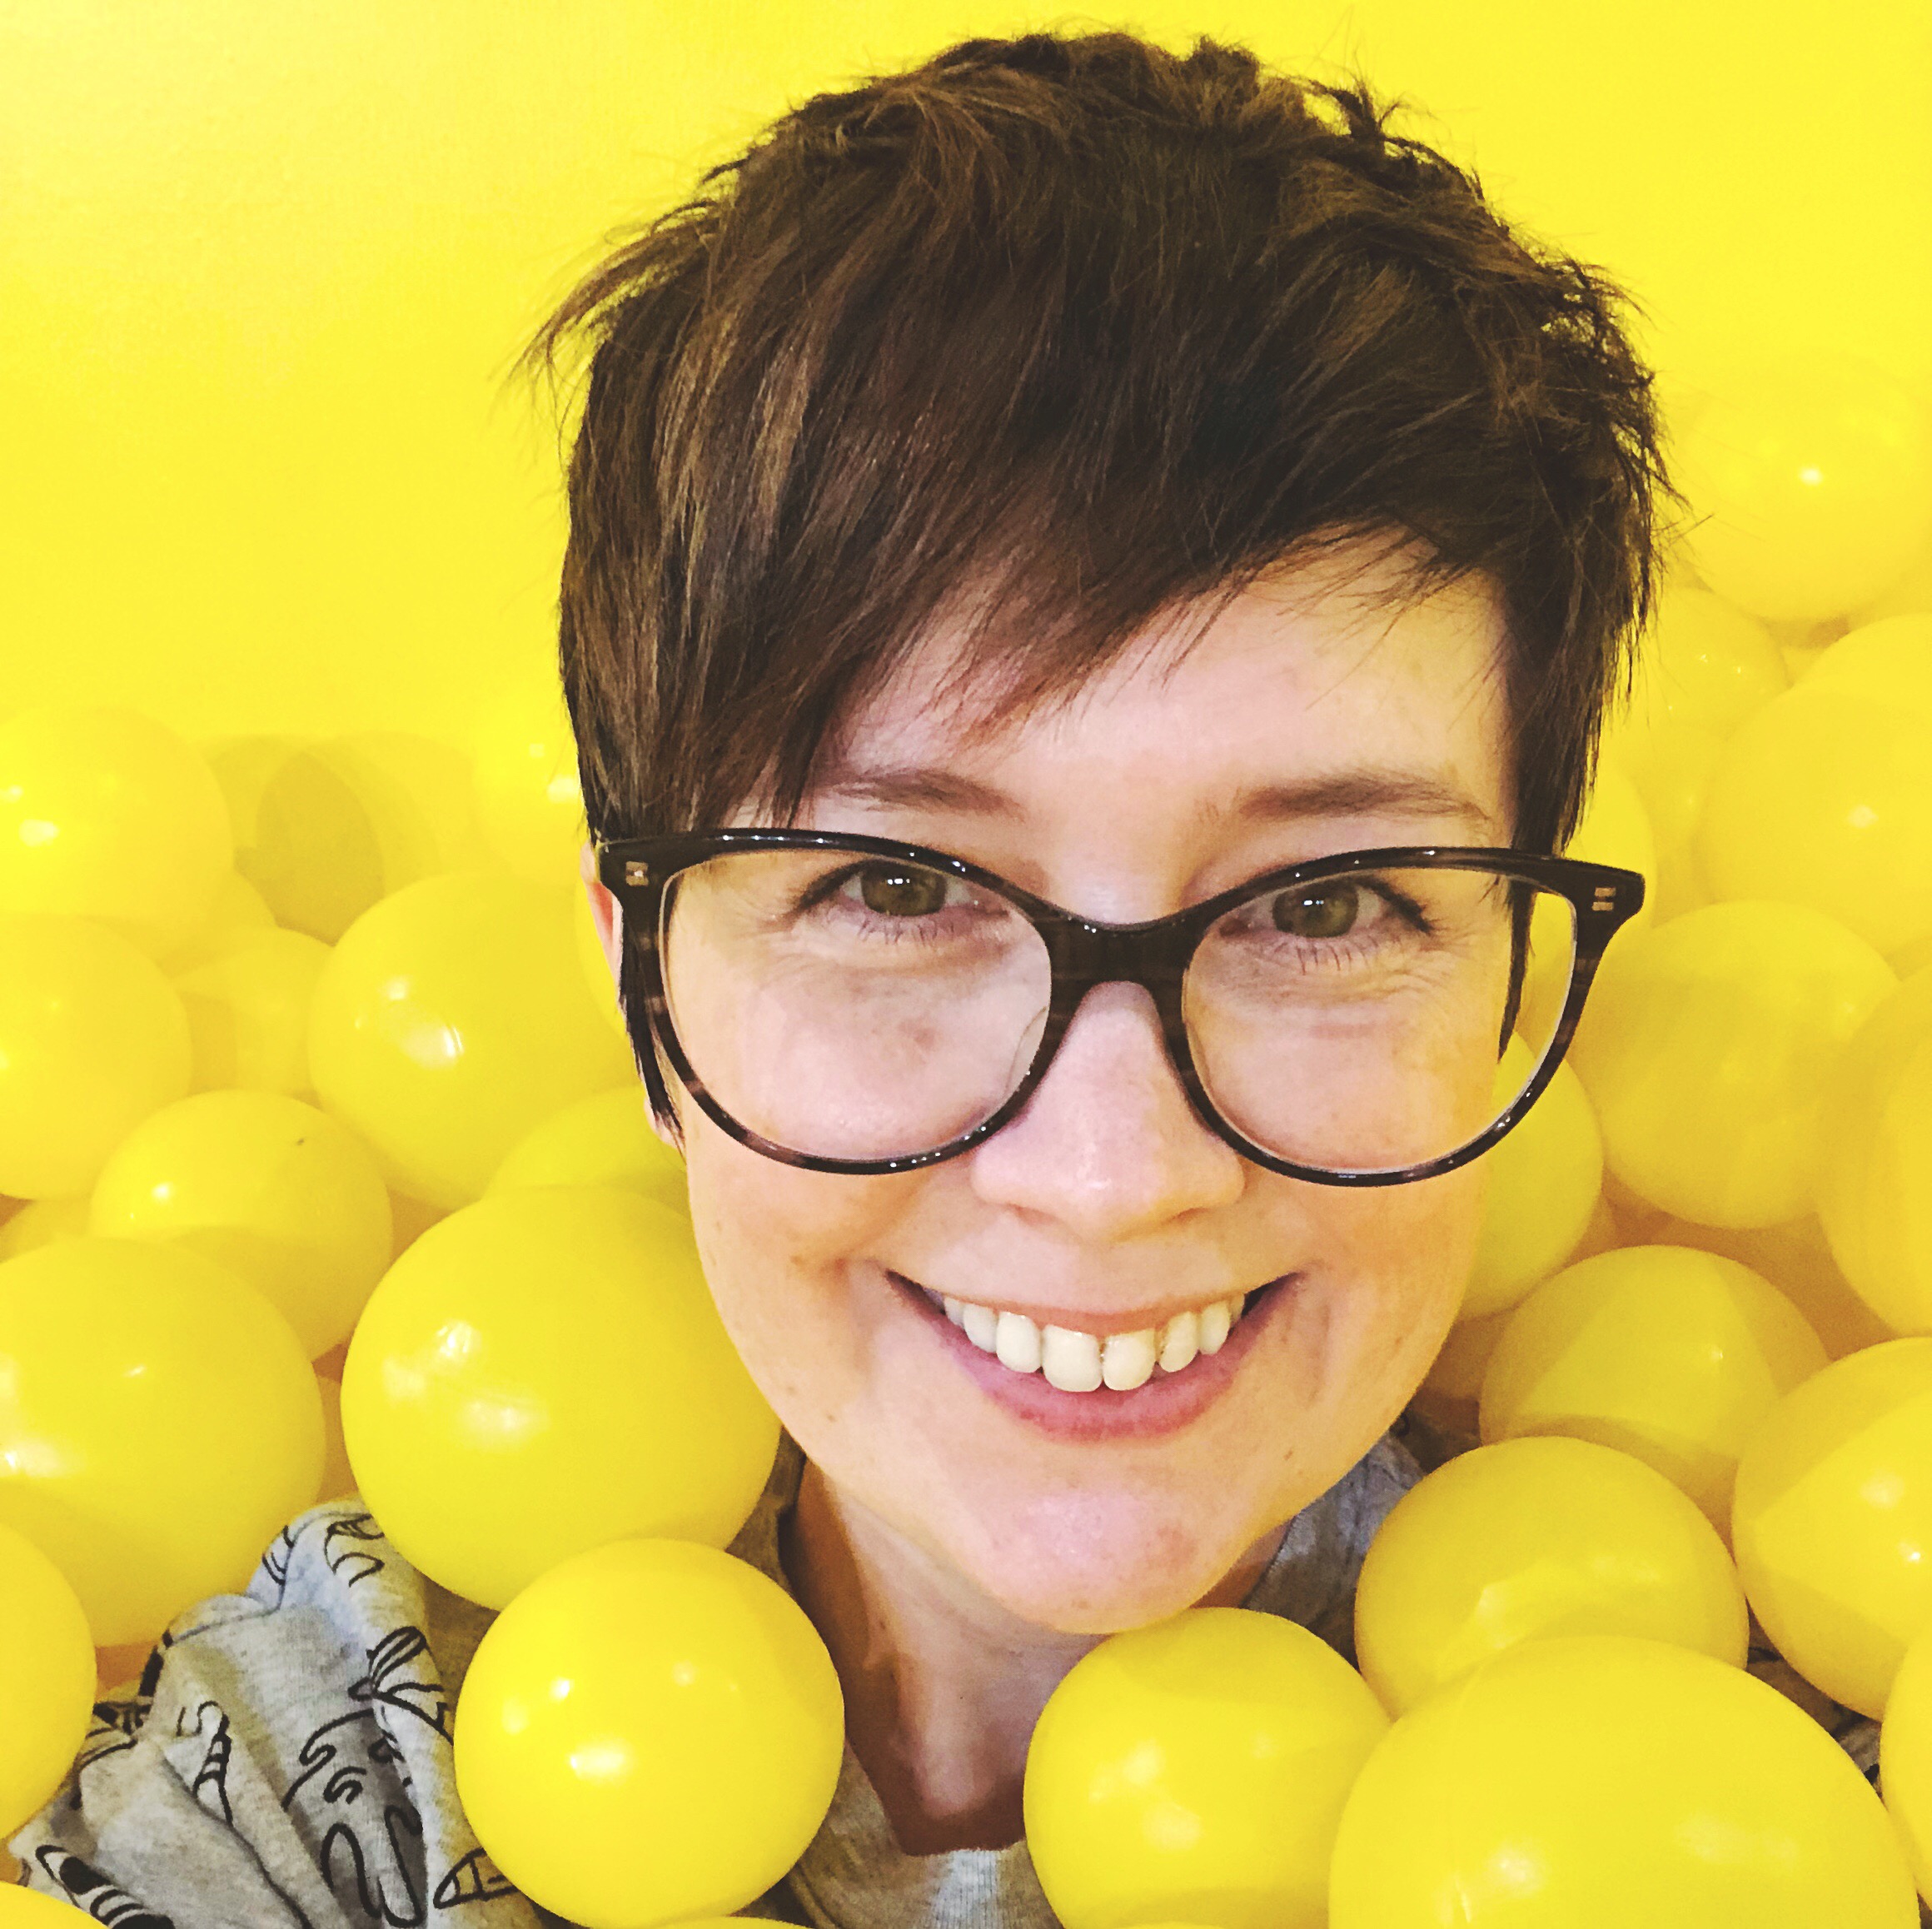 Carrie in a yellow ball pit